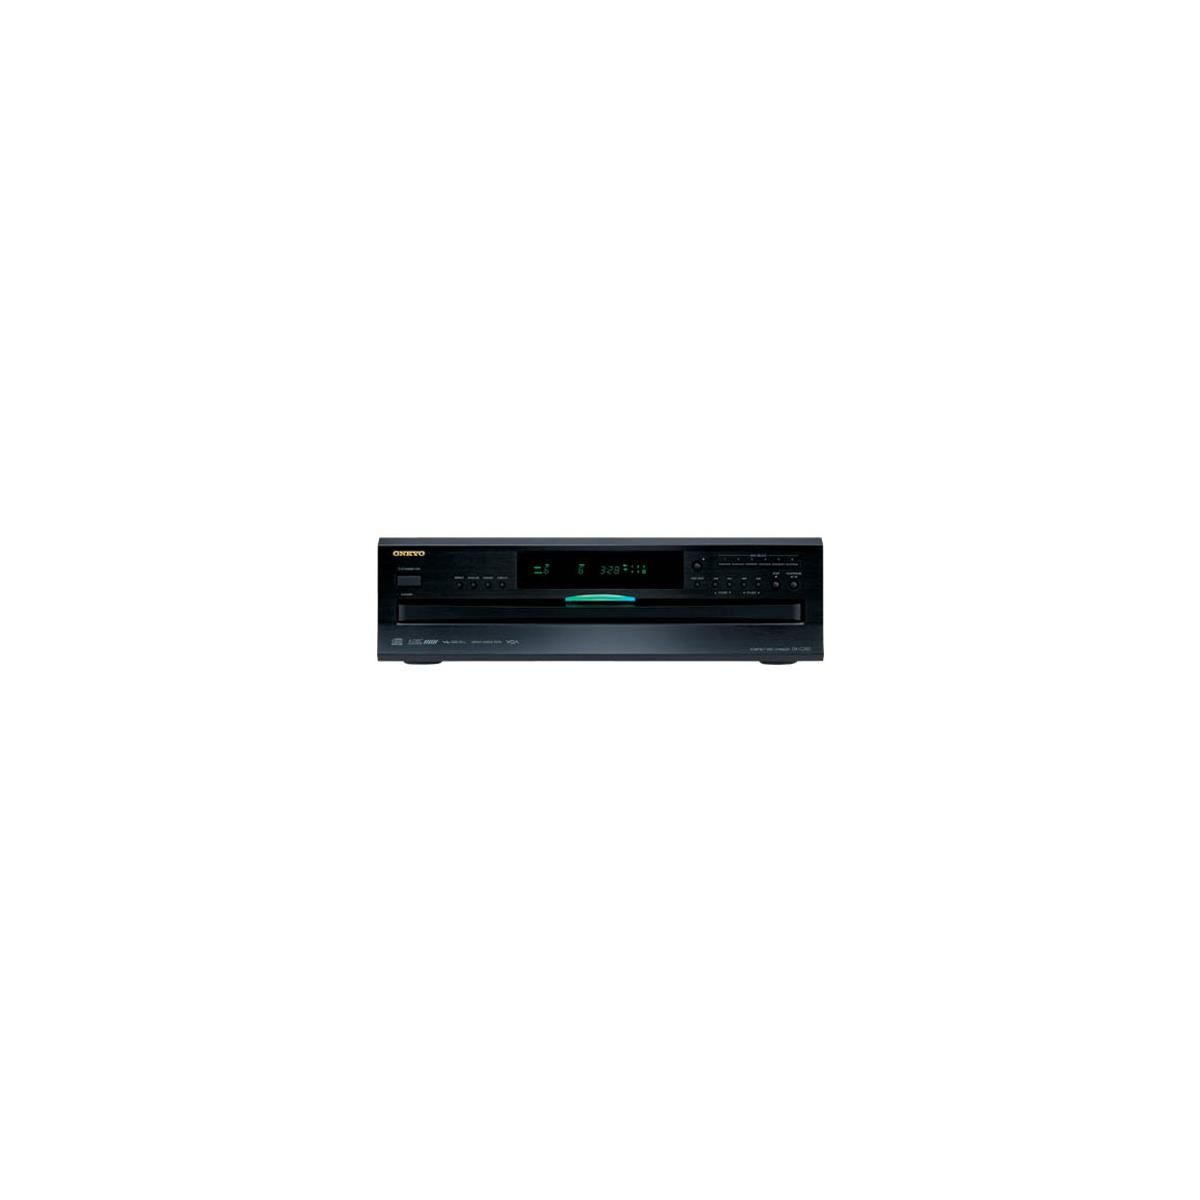 Onkyo DX-C390 6-Disc CD Carousel Changer with MP3 CD Playback